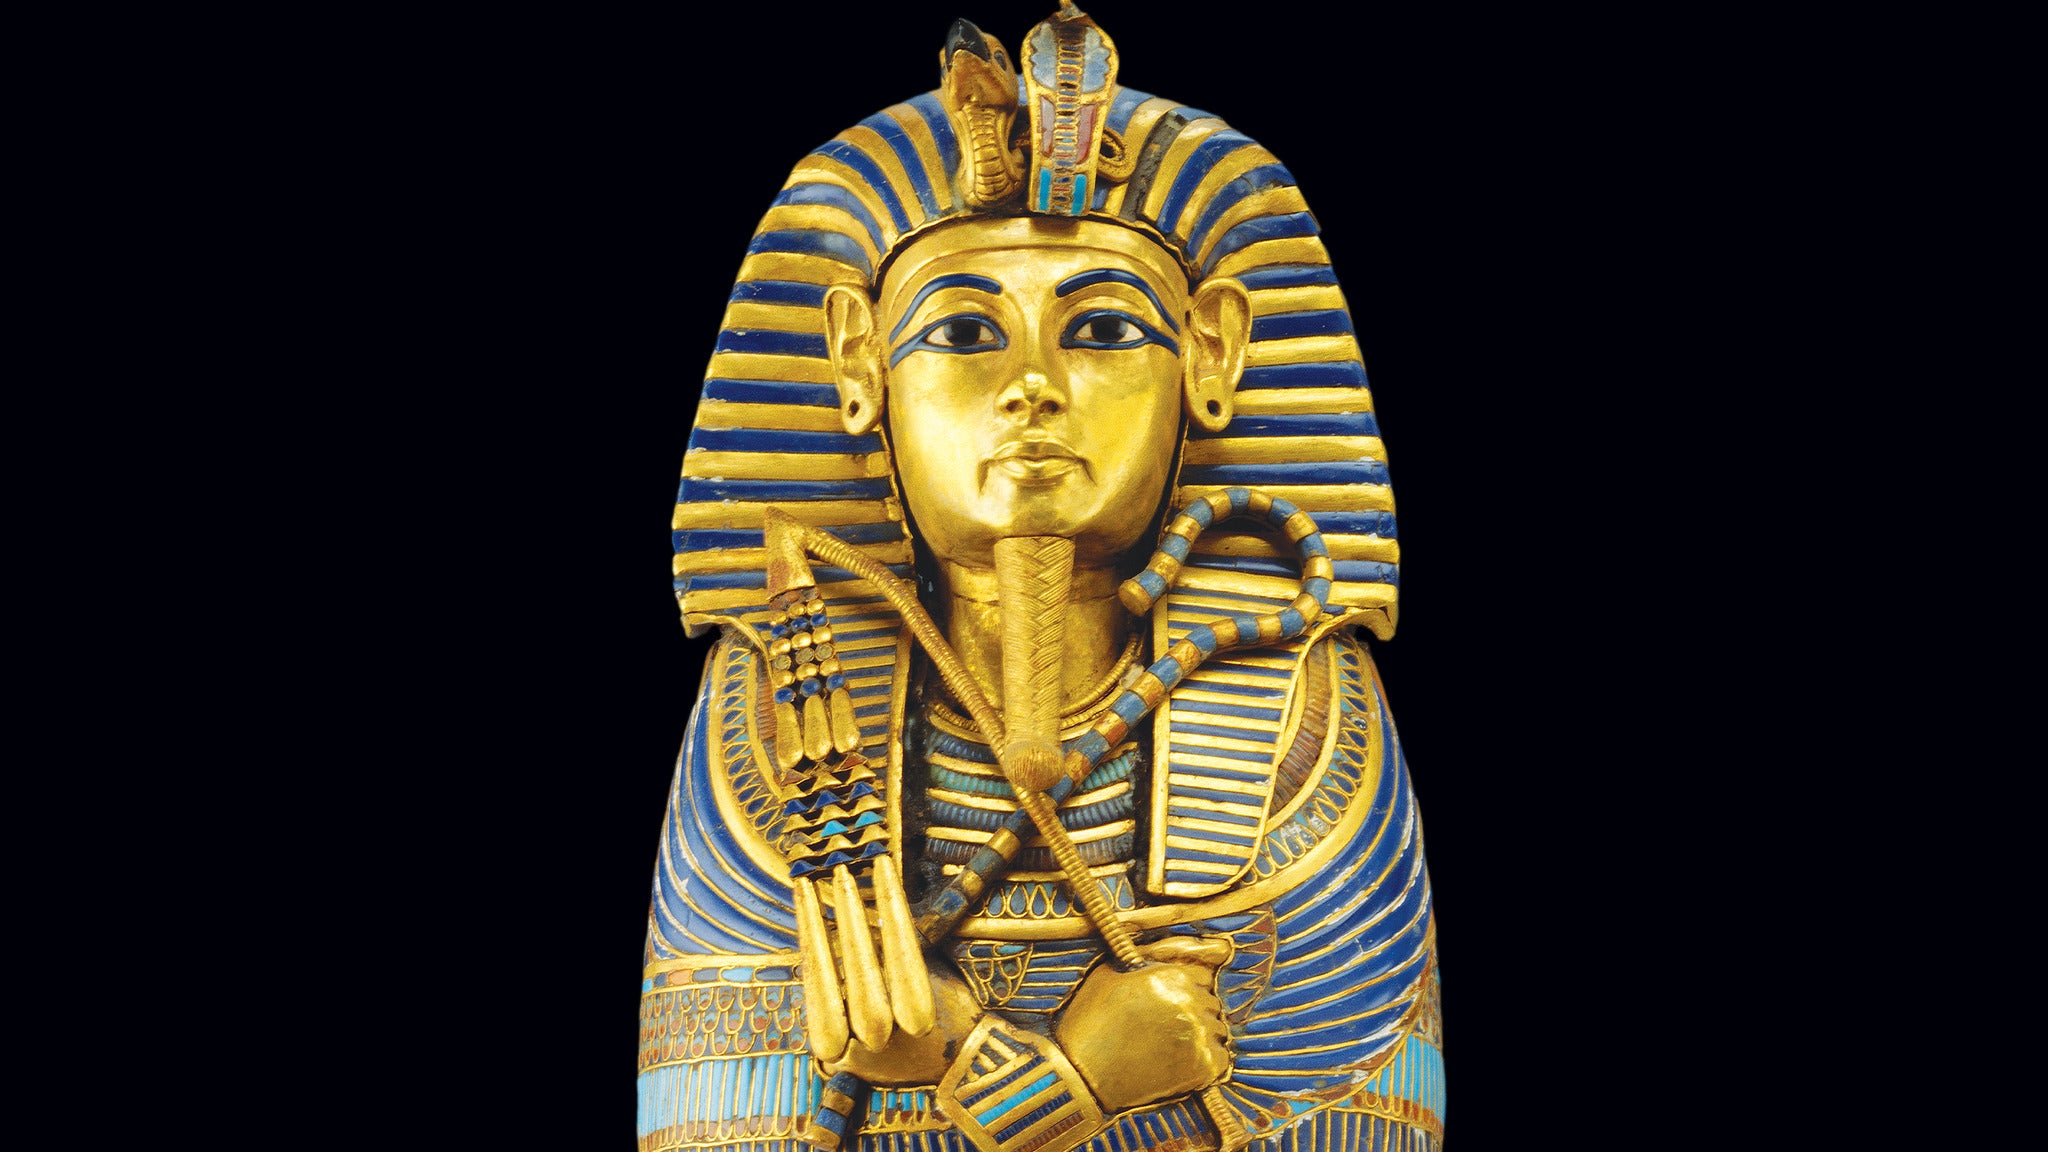 King Tut Treasures Of The Golden Pharaoh Tickets Presale Info And